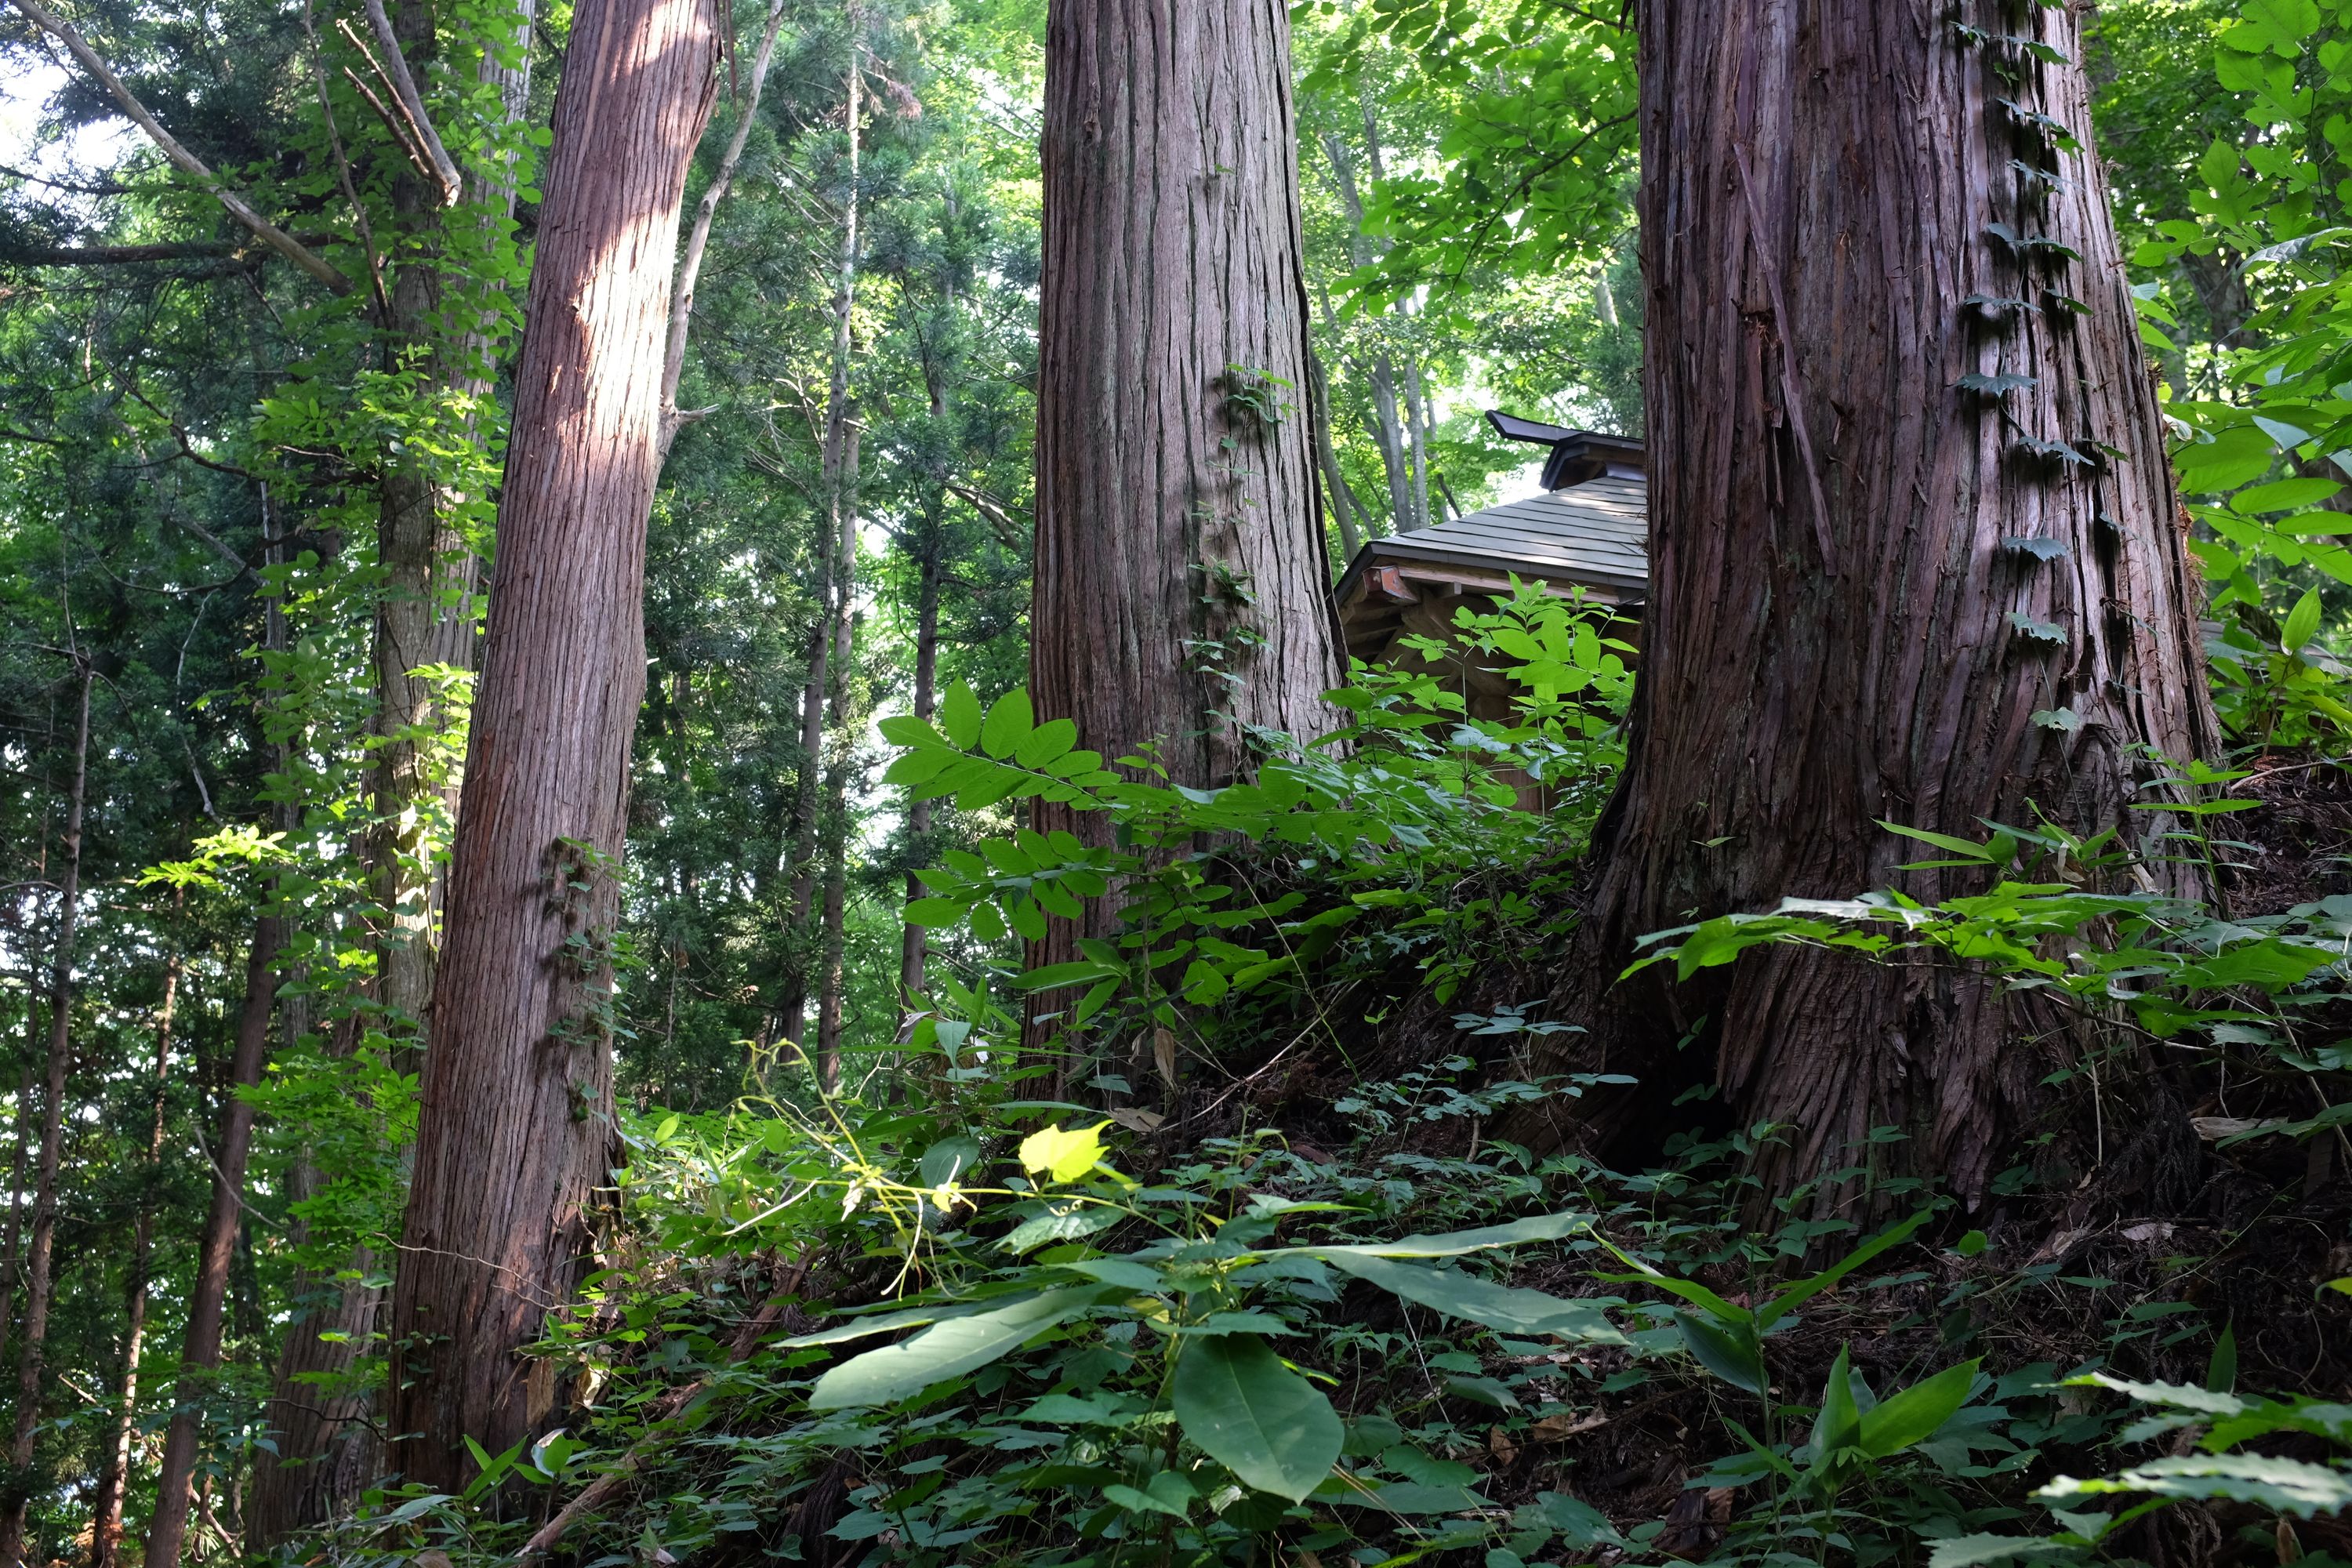 The roof of the shrine peeks out from between cedar trunks high above.